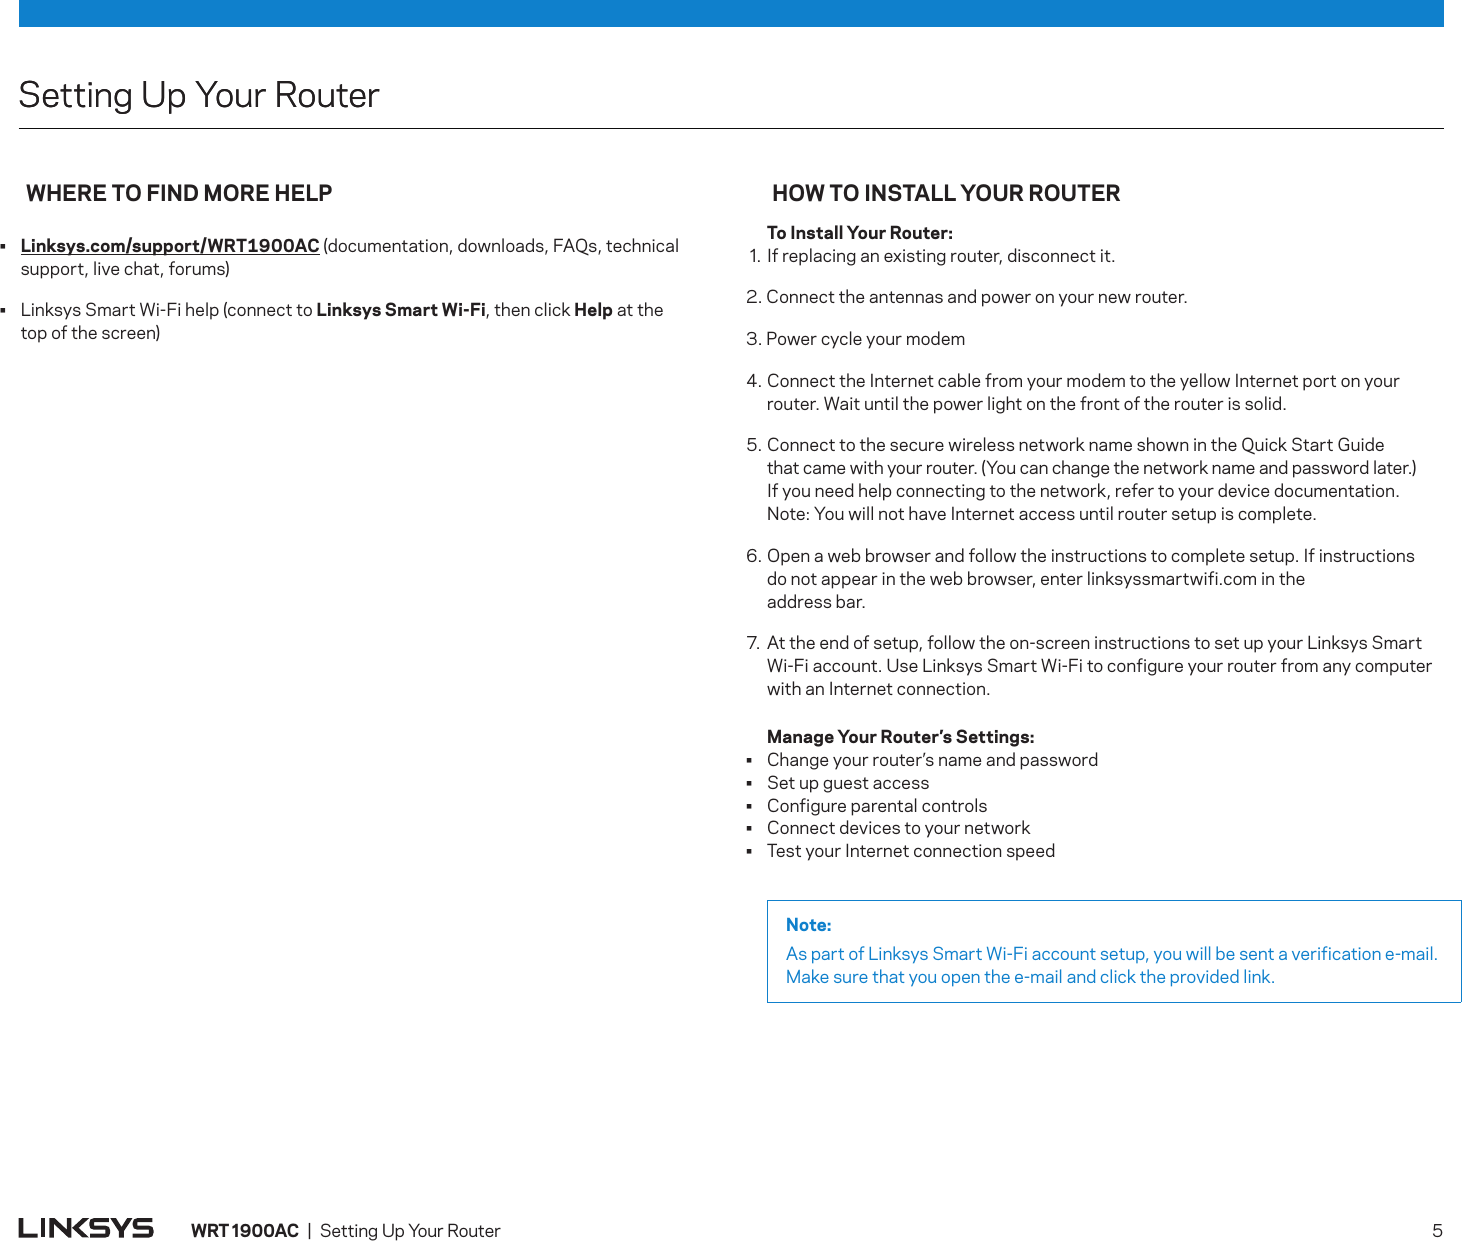 Setting Up Your RouterWHERE TO FIND MORE HELP•  Linksys.com/support/WRT1900AC (documentation, downloads, FAQs, technical support, live chat, forums)•  Linksys Smart Wi-Fi help (connect to Linksys Smart Wi-Fi, then click Help at the  top of the screen)HOW TO INSTALL YOUR ROUTER  To Install Your Router: . If replacing an existing router, disconnect it. 2. Connect the antennas and power on your new router.3. Power cycle your modem4.     Connect the Internet cable from your modem to the yellow Internet port on your router. Wait until the power light on the front of the router is solid.5. Connect to the secure wireless network name shown in the Quick Start Guide  that came with your router. (You can change the network name and password later.)  If you need help connecting to the network, refer to your device documentation.  Note: You will not have Internet access until router setup is complete.6.  Open a web browser and follow the instructions to complete setup. If instructions  do not appear in the web browser, enter linksyssmartwifi.com in the  address bar.7. At the end of setup, follow the on-screen instructions to set up your Linksys Smart Wi-Fi account. Use Linksys Smart Wi-Fi to configure your router from any computer with an Internet connection.   Manage Your Router’s Settings:•  Change your router’s name and password•  Set up guest access•  Configure parental controls•  Connect devices to your network•  Test your Internet connection speedNote:As part of Linksys Smart Wi-Fi account setup, you will be sent a verification e-mail. Make sure that you open the e-mail and click the provided link.Setting Up Your RouterWRT 1900AC  |  Setting Up Your Router   5